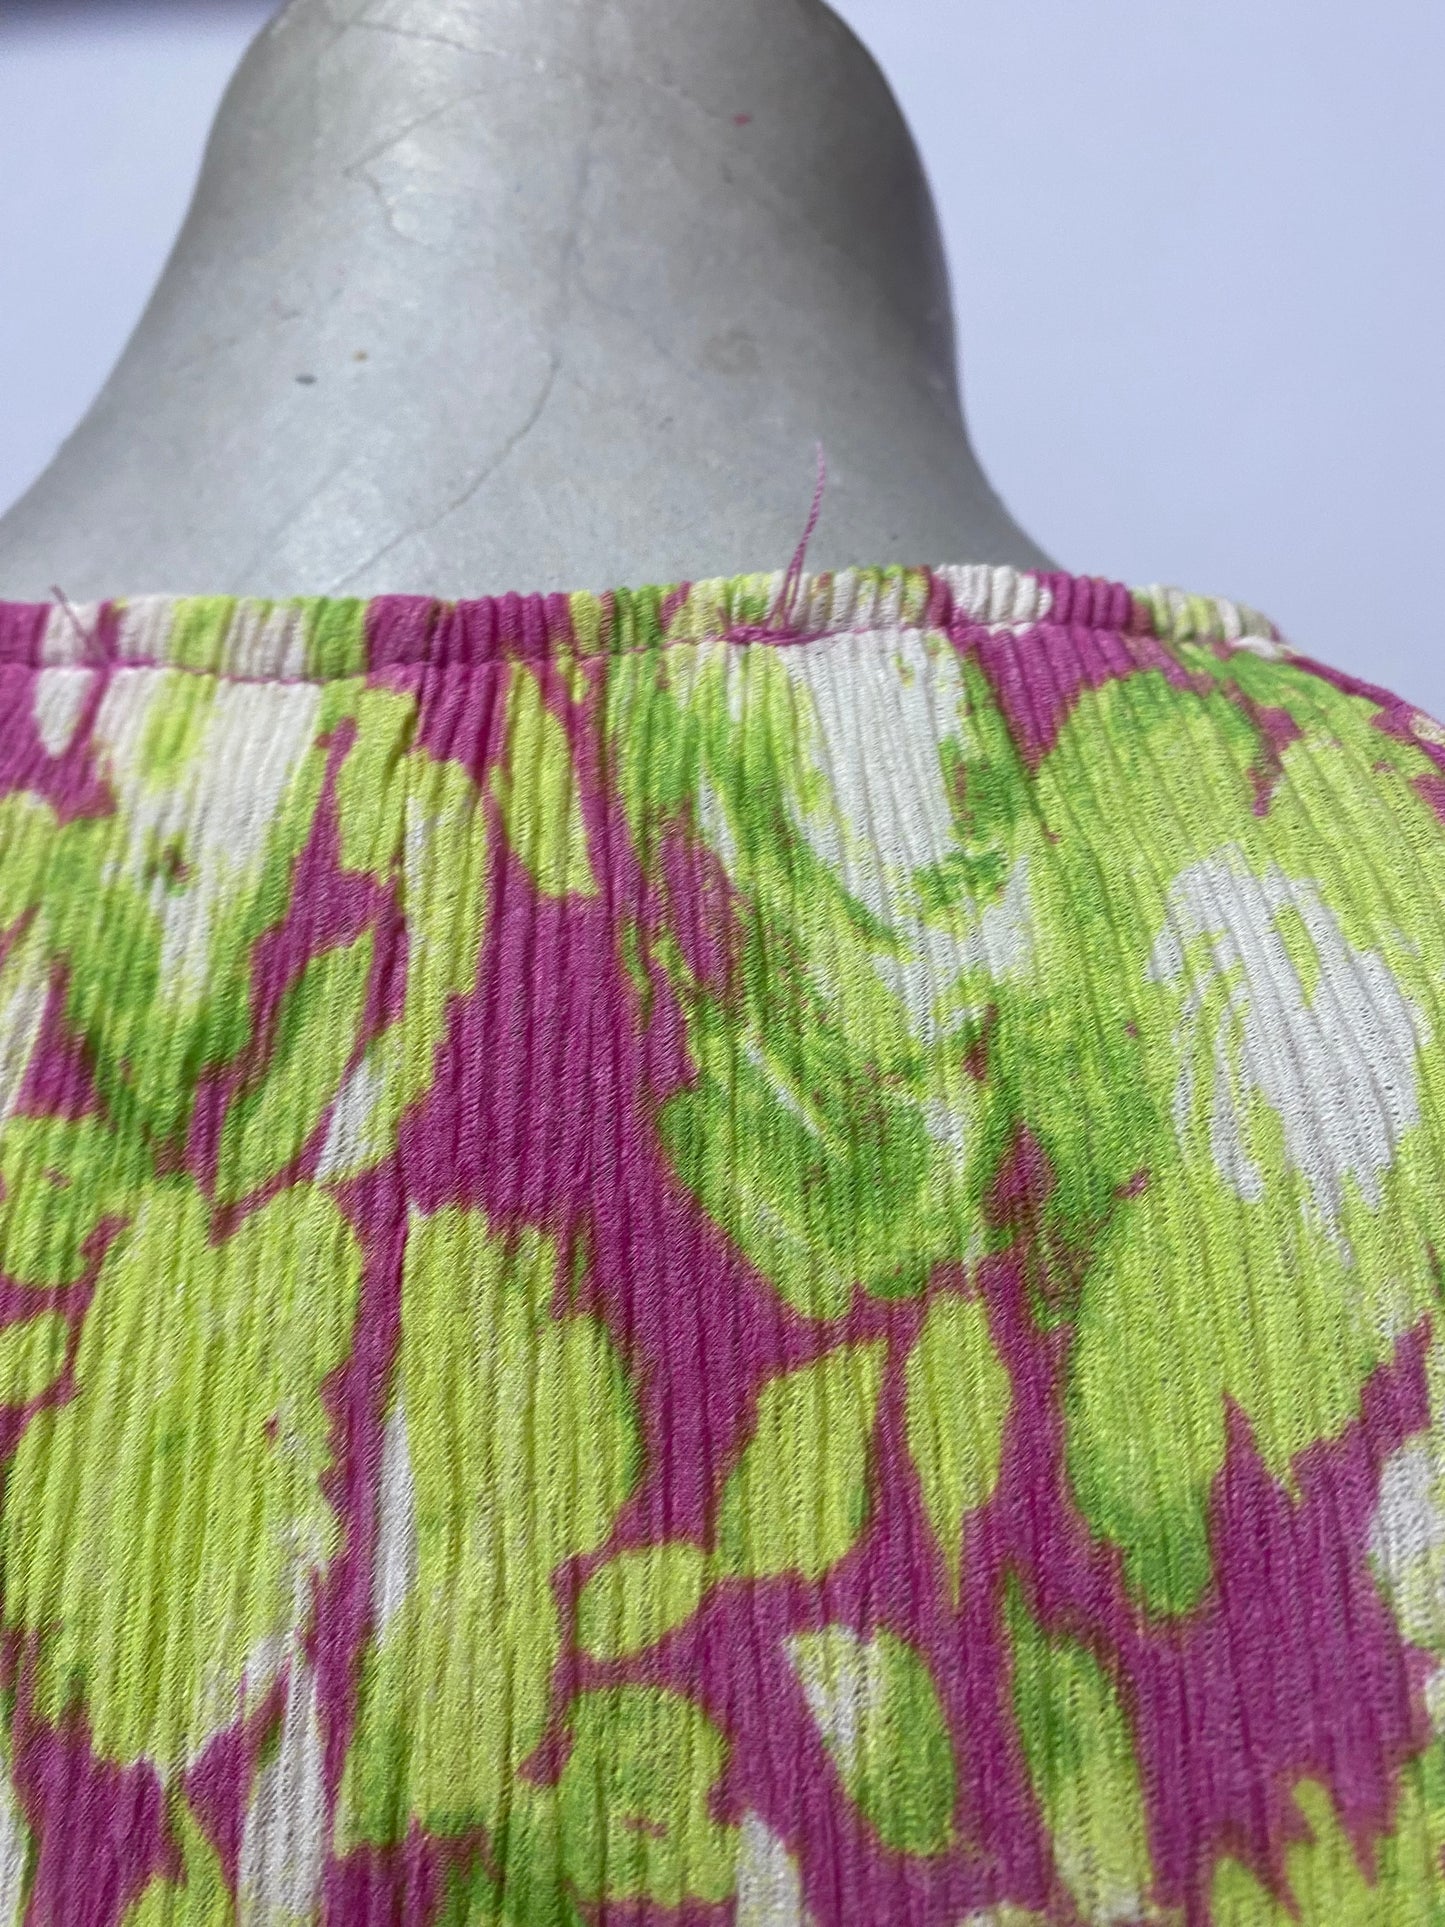 Mango Green and Pink Patterned Summer Dress Small